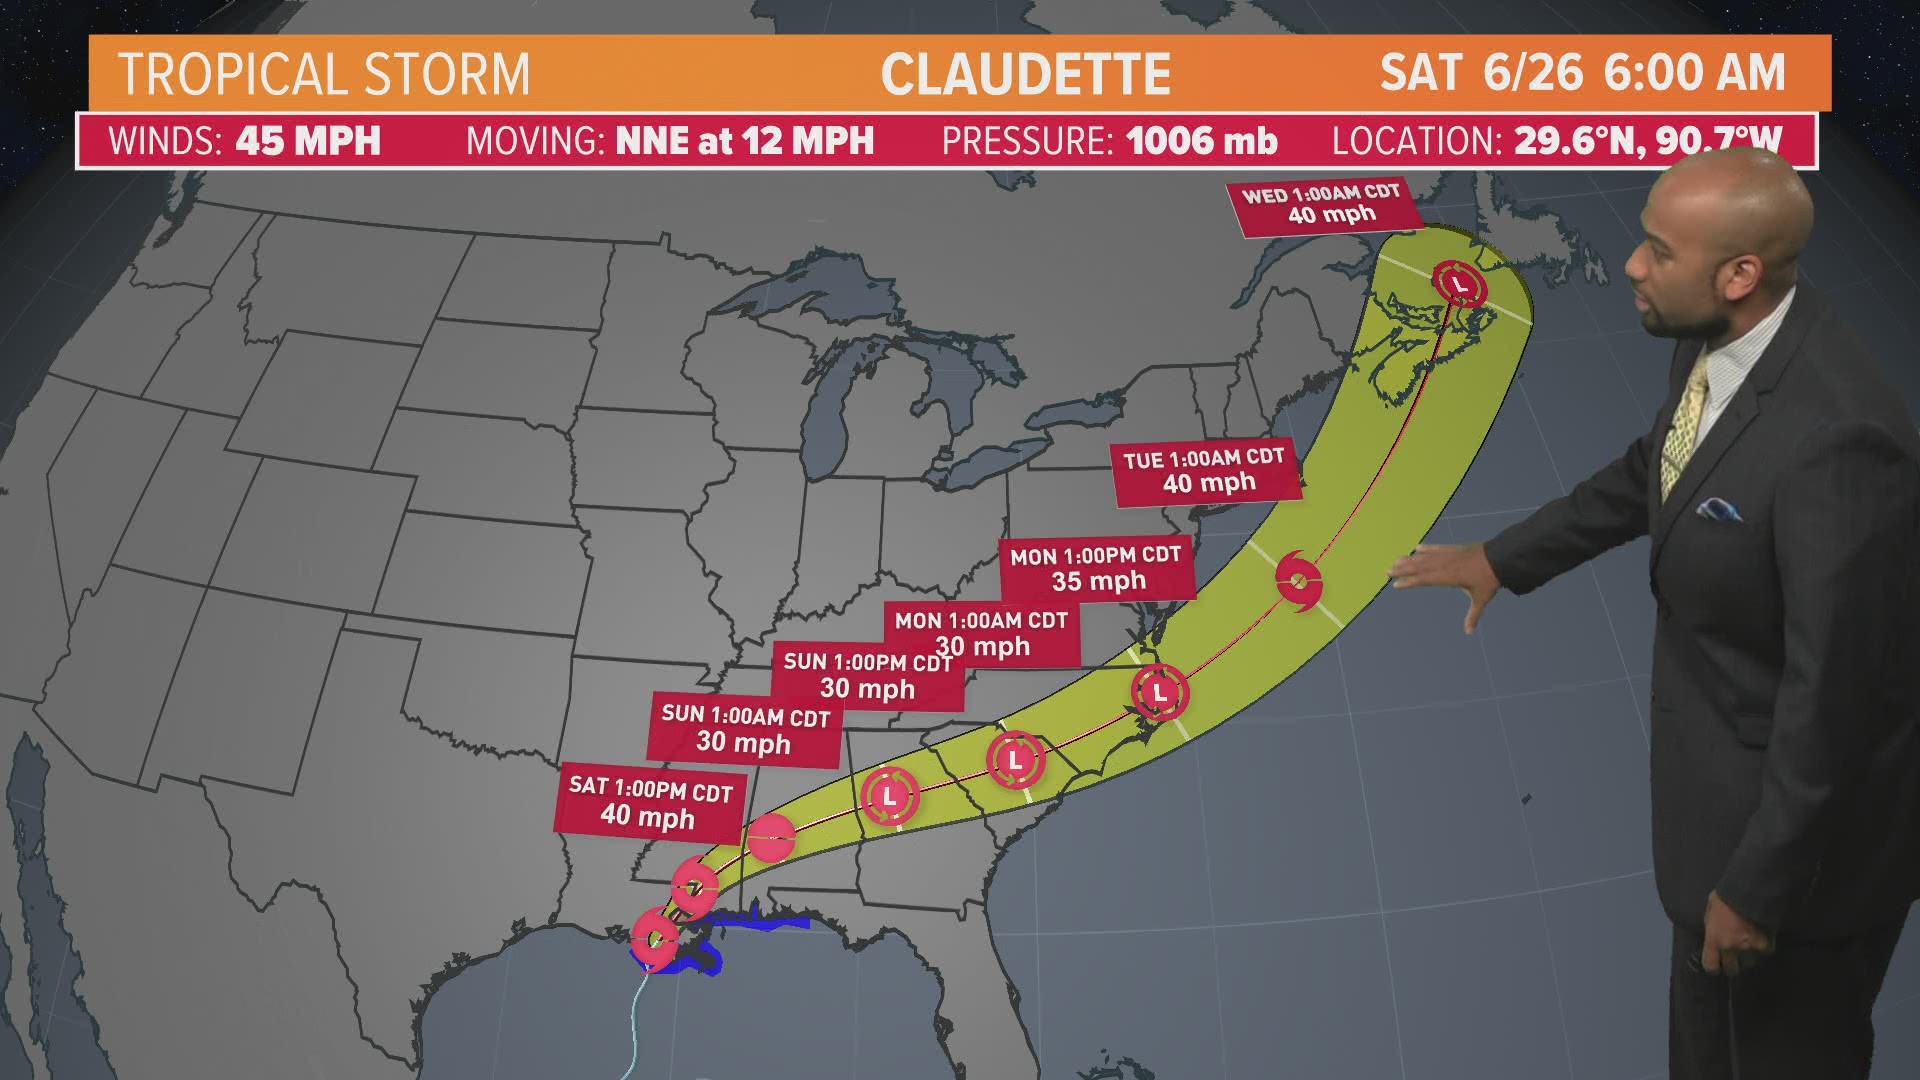 We now have Tropical Storm Claudette. The system in the Gulf strengthened into a tropical storm just outside of New Orleans Saturday morning.